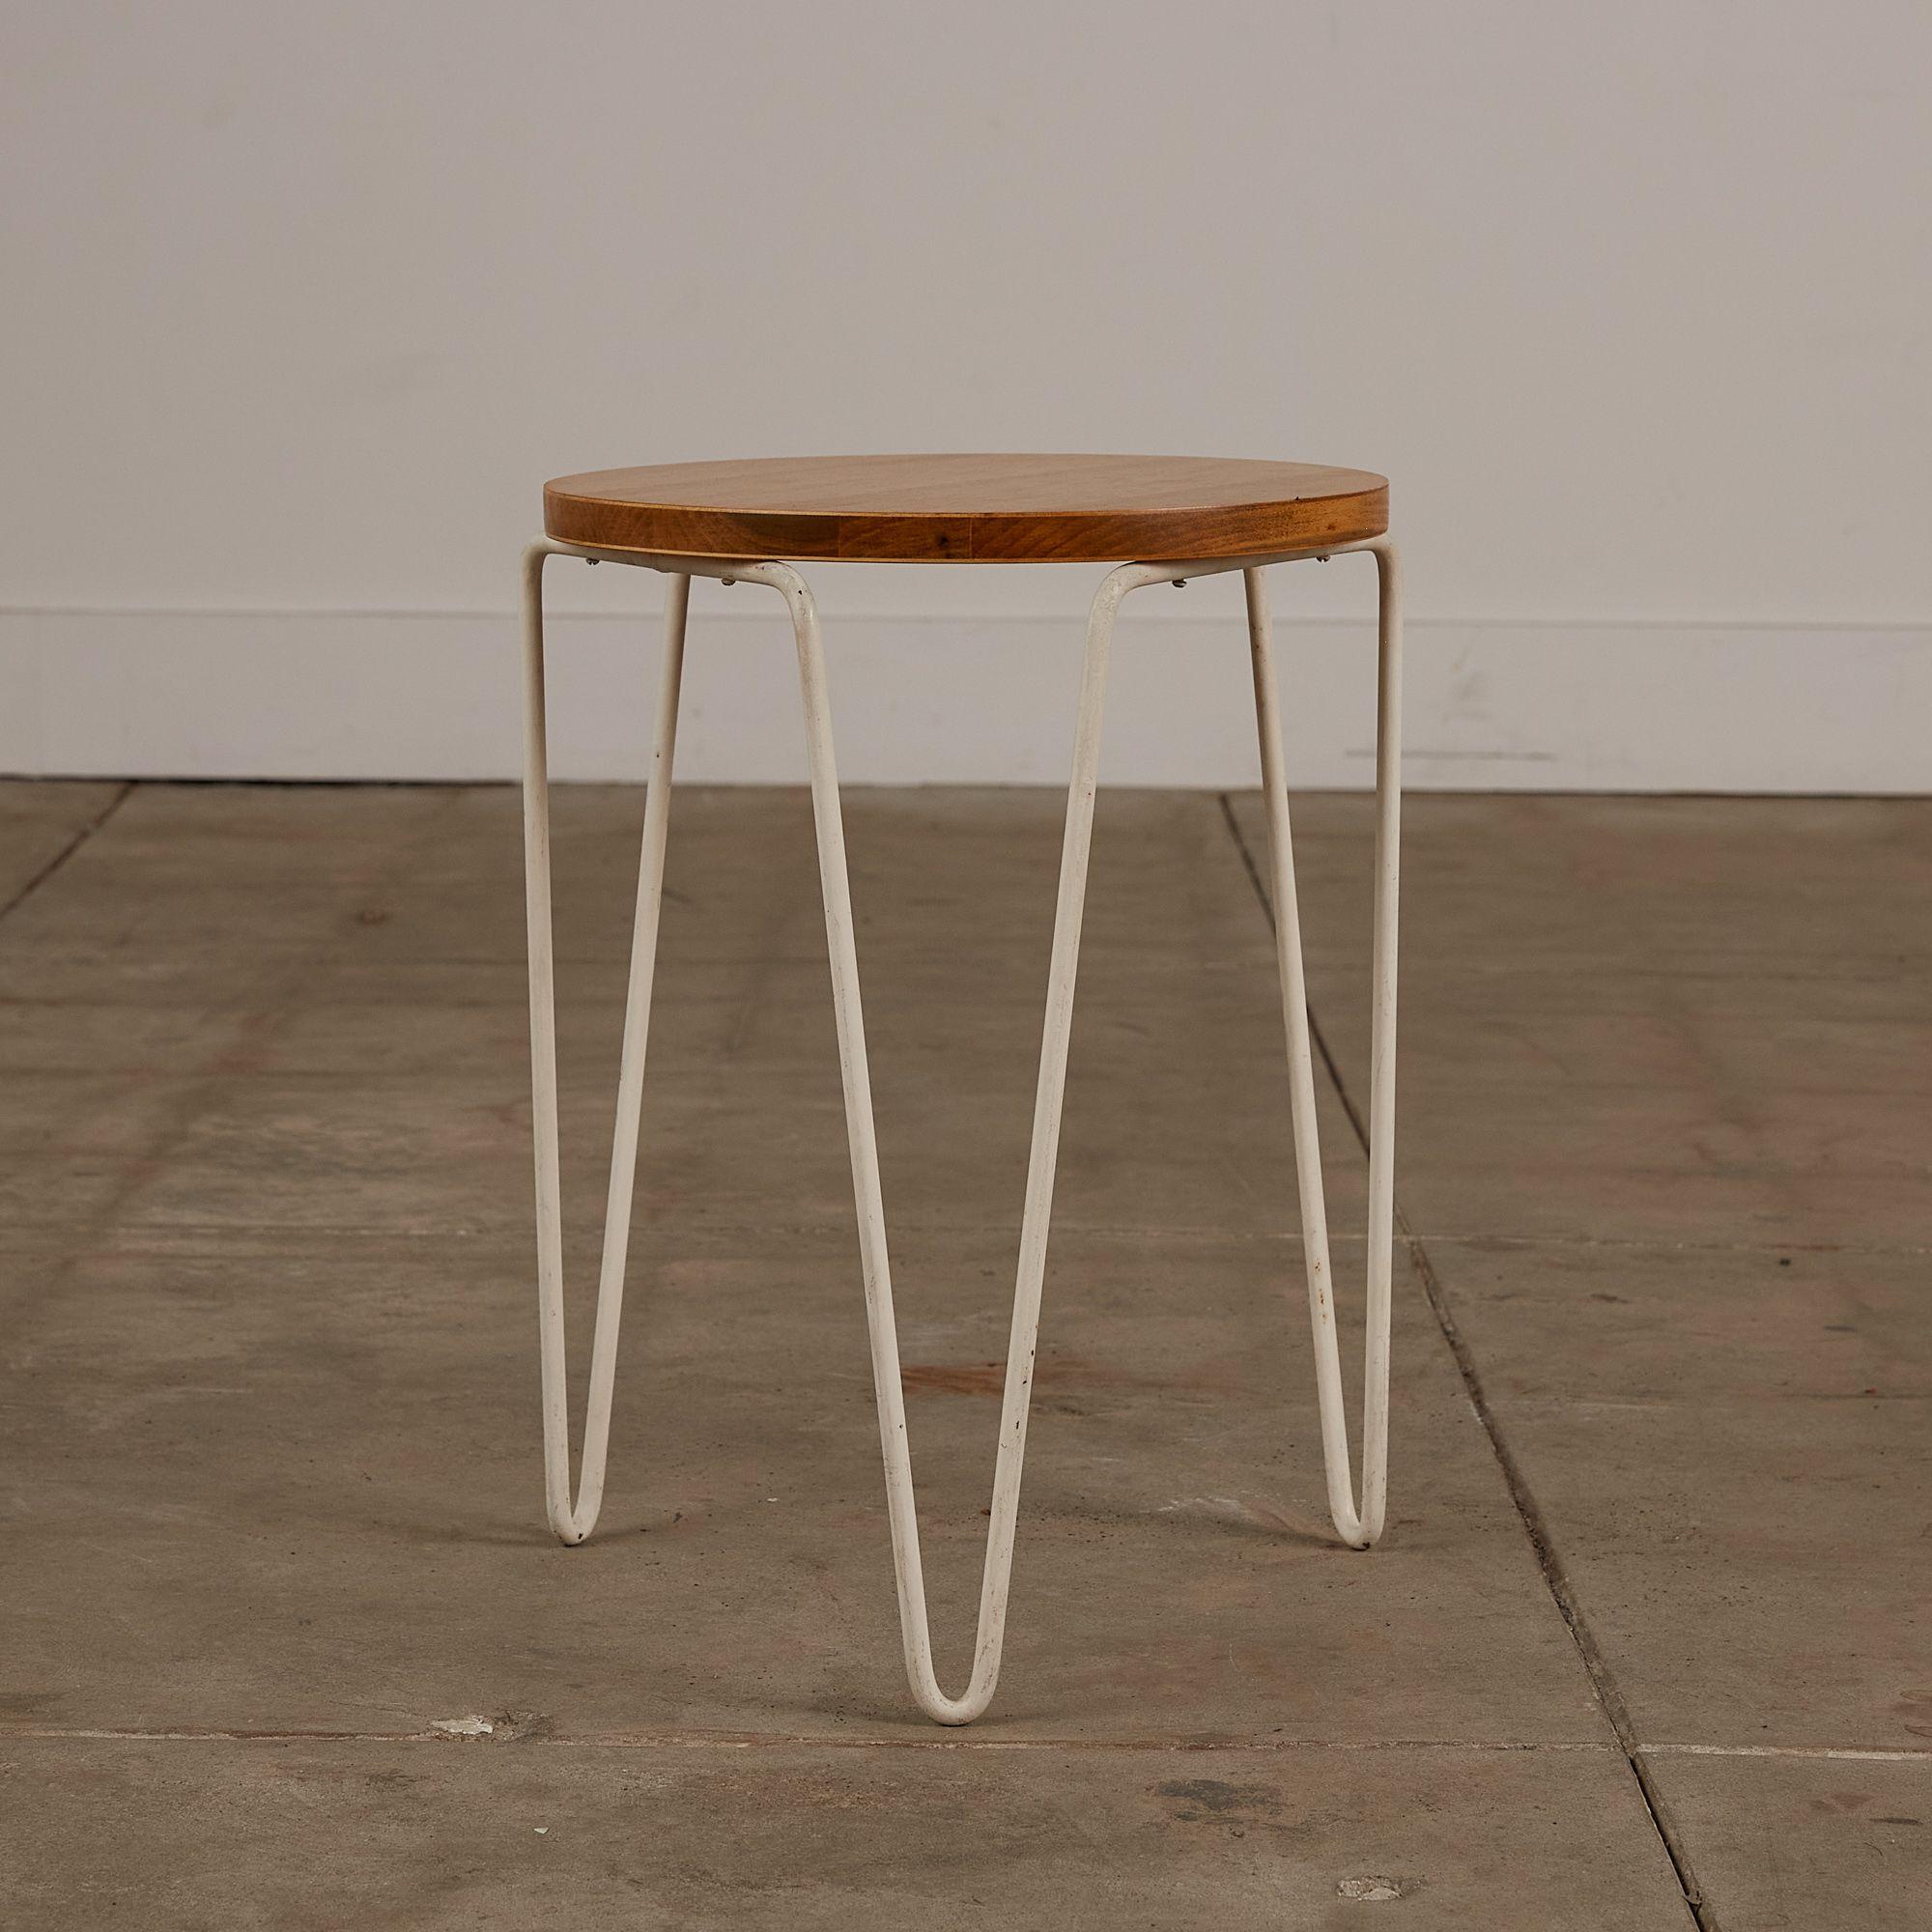 A design by Florence Knoll for Knoll International c.1940s, USA. This Model 75 stool features a birch seat atop of three white iron hairpin legs. A simplistic design that can easily be used as both a stool and side table.

Dimensions: 13” diameter